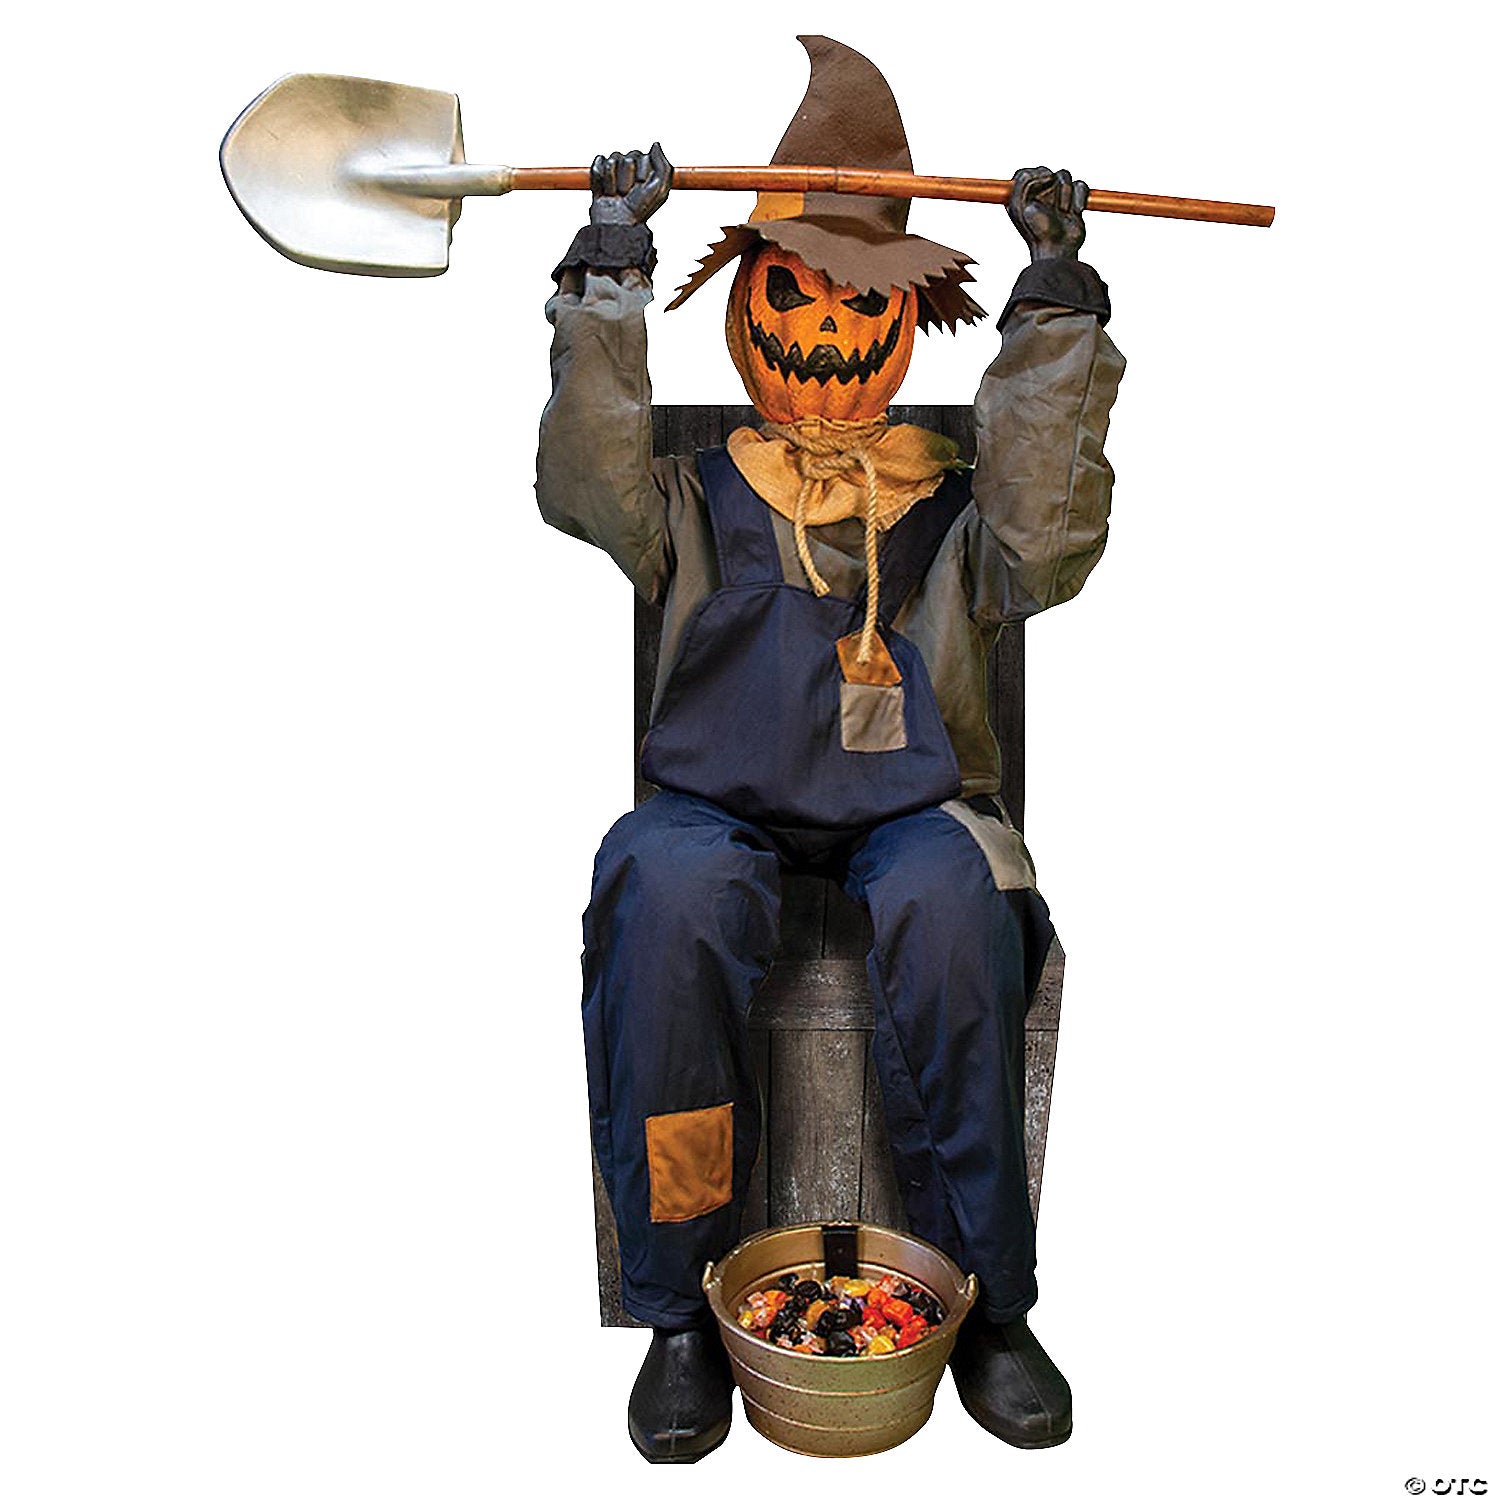 Smiling Jack Greeter with Chair Halloween Decoration